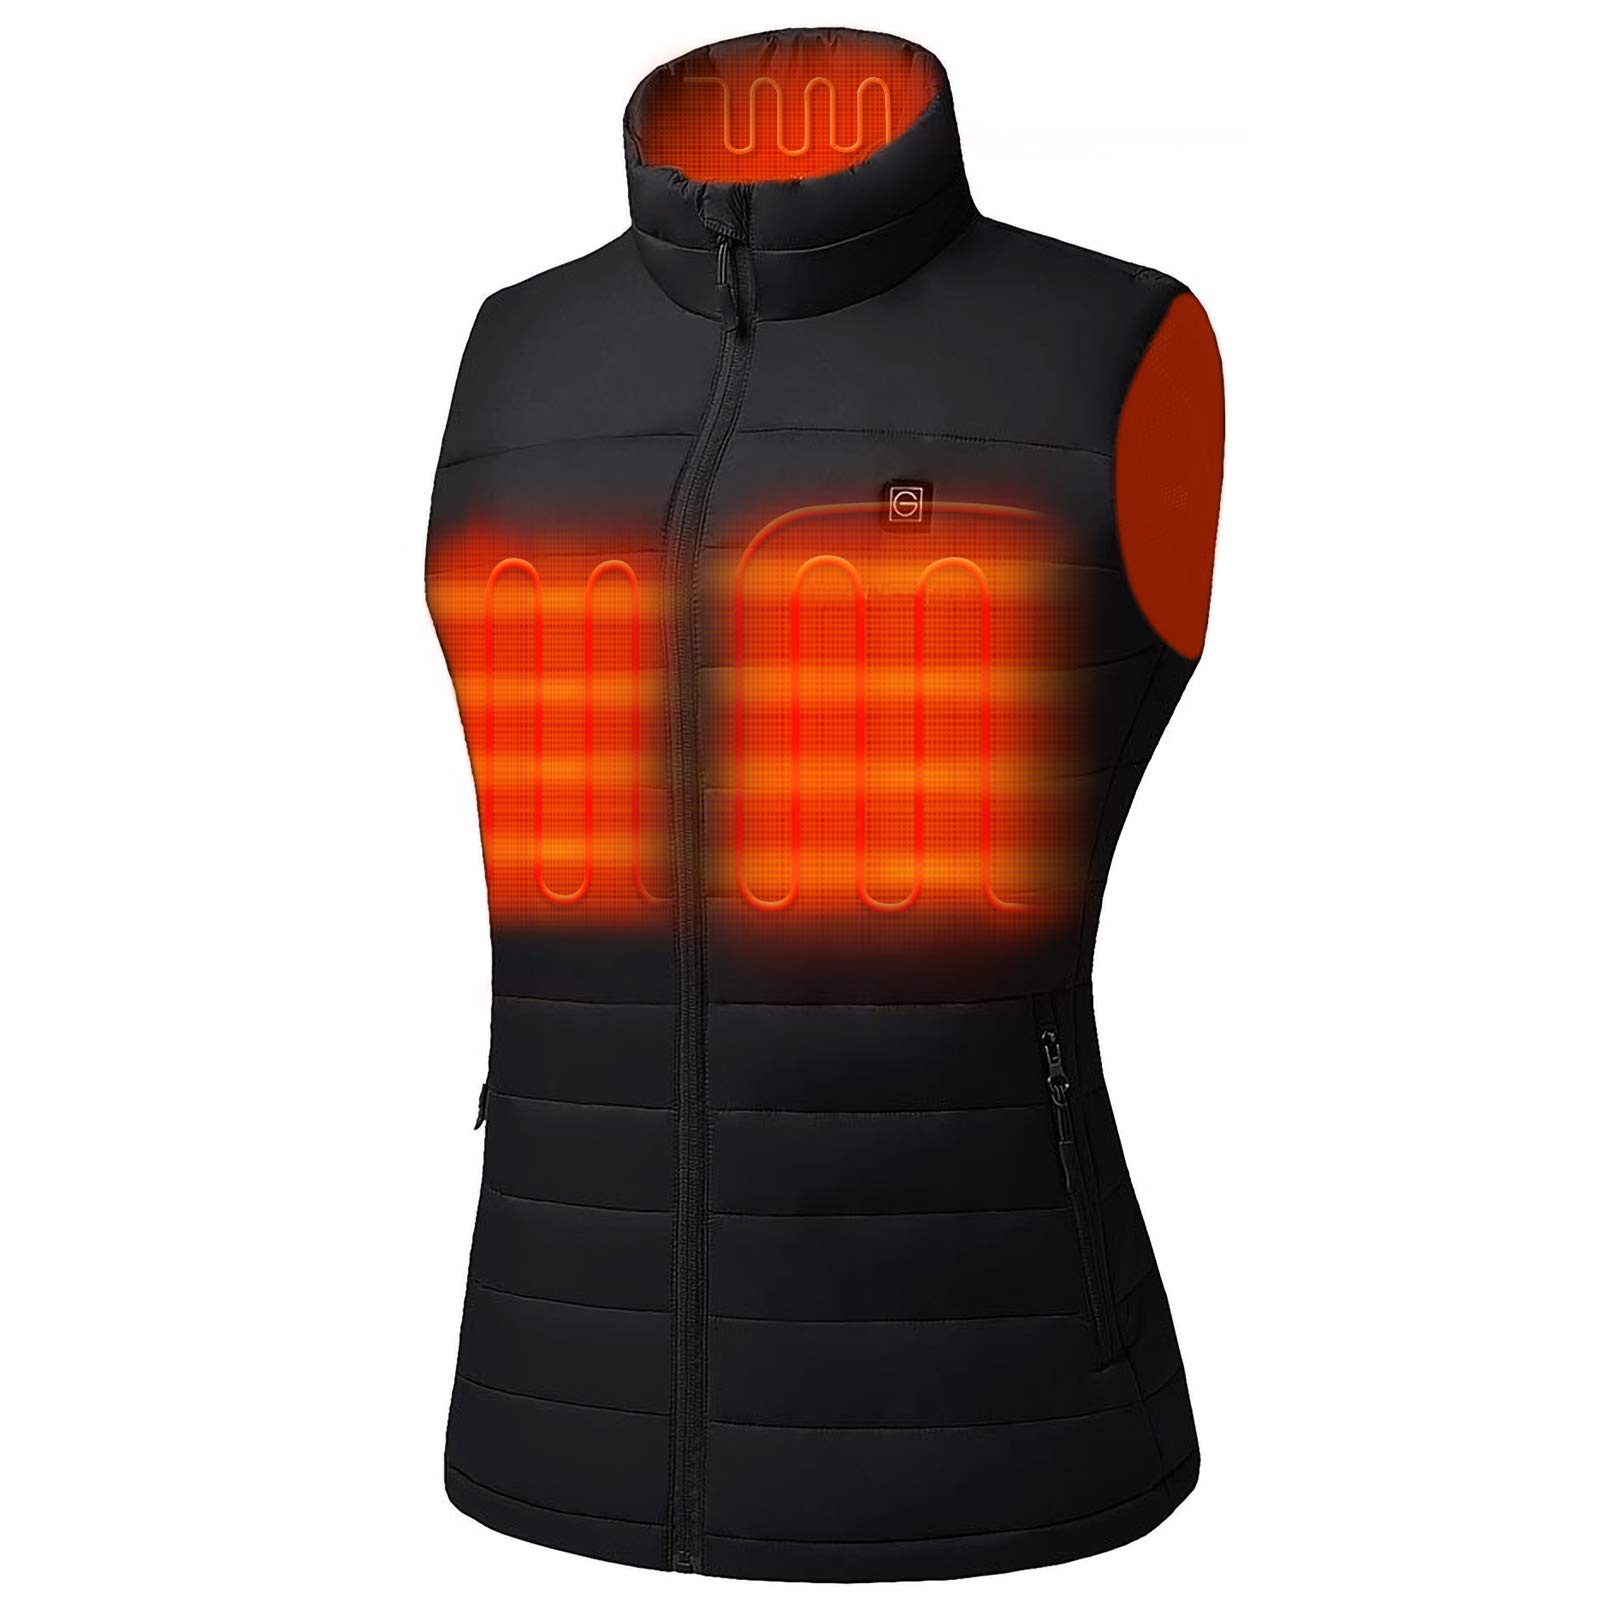 Women's Heated Vest with Battery Pack 7.4V